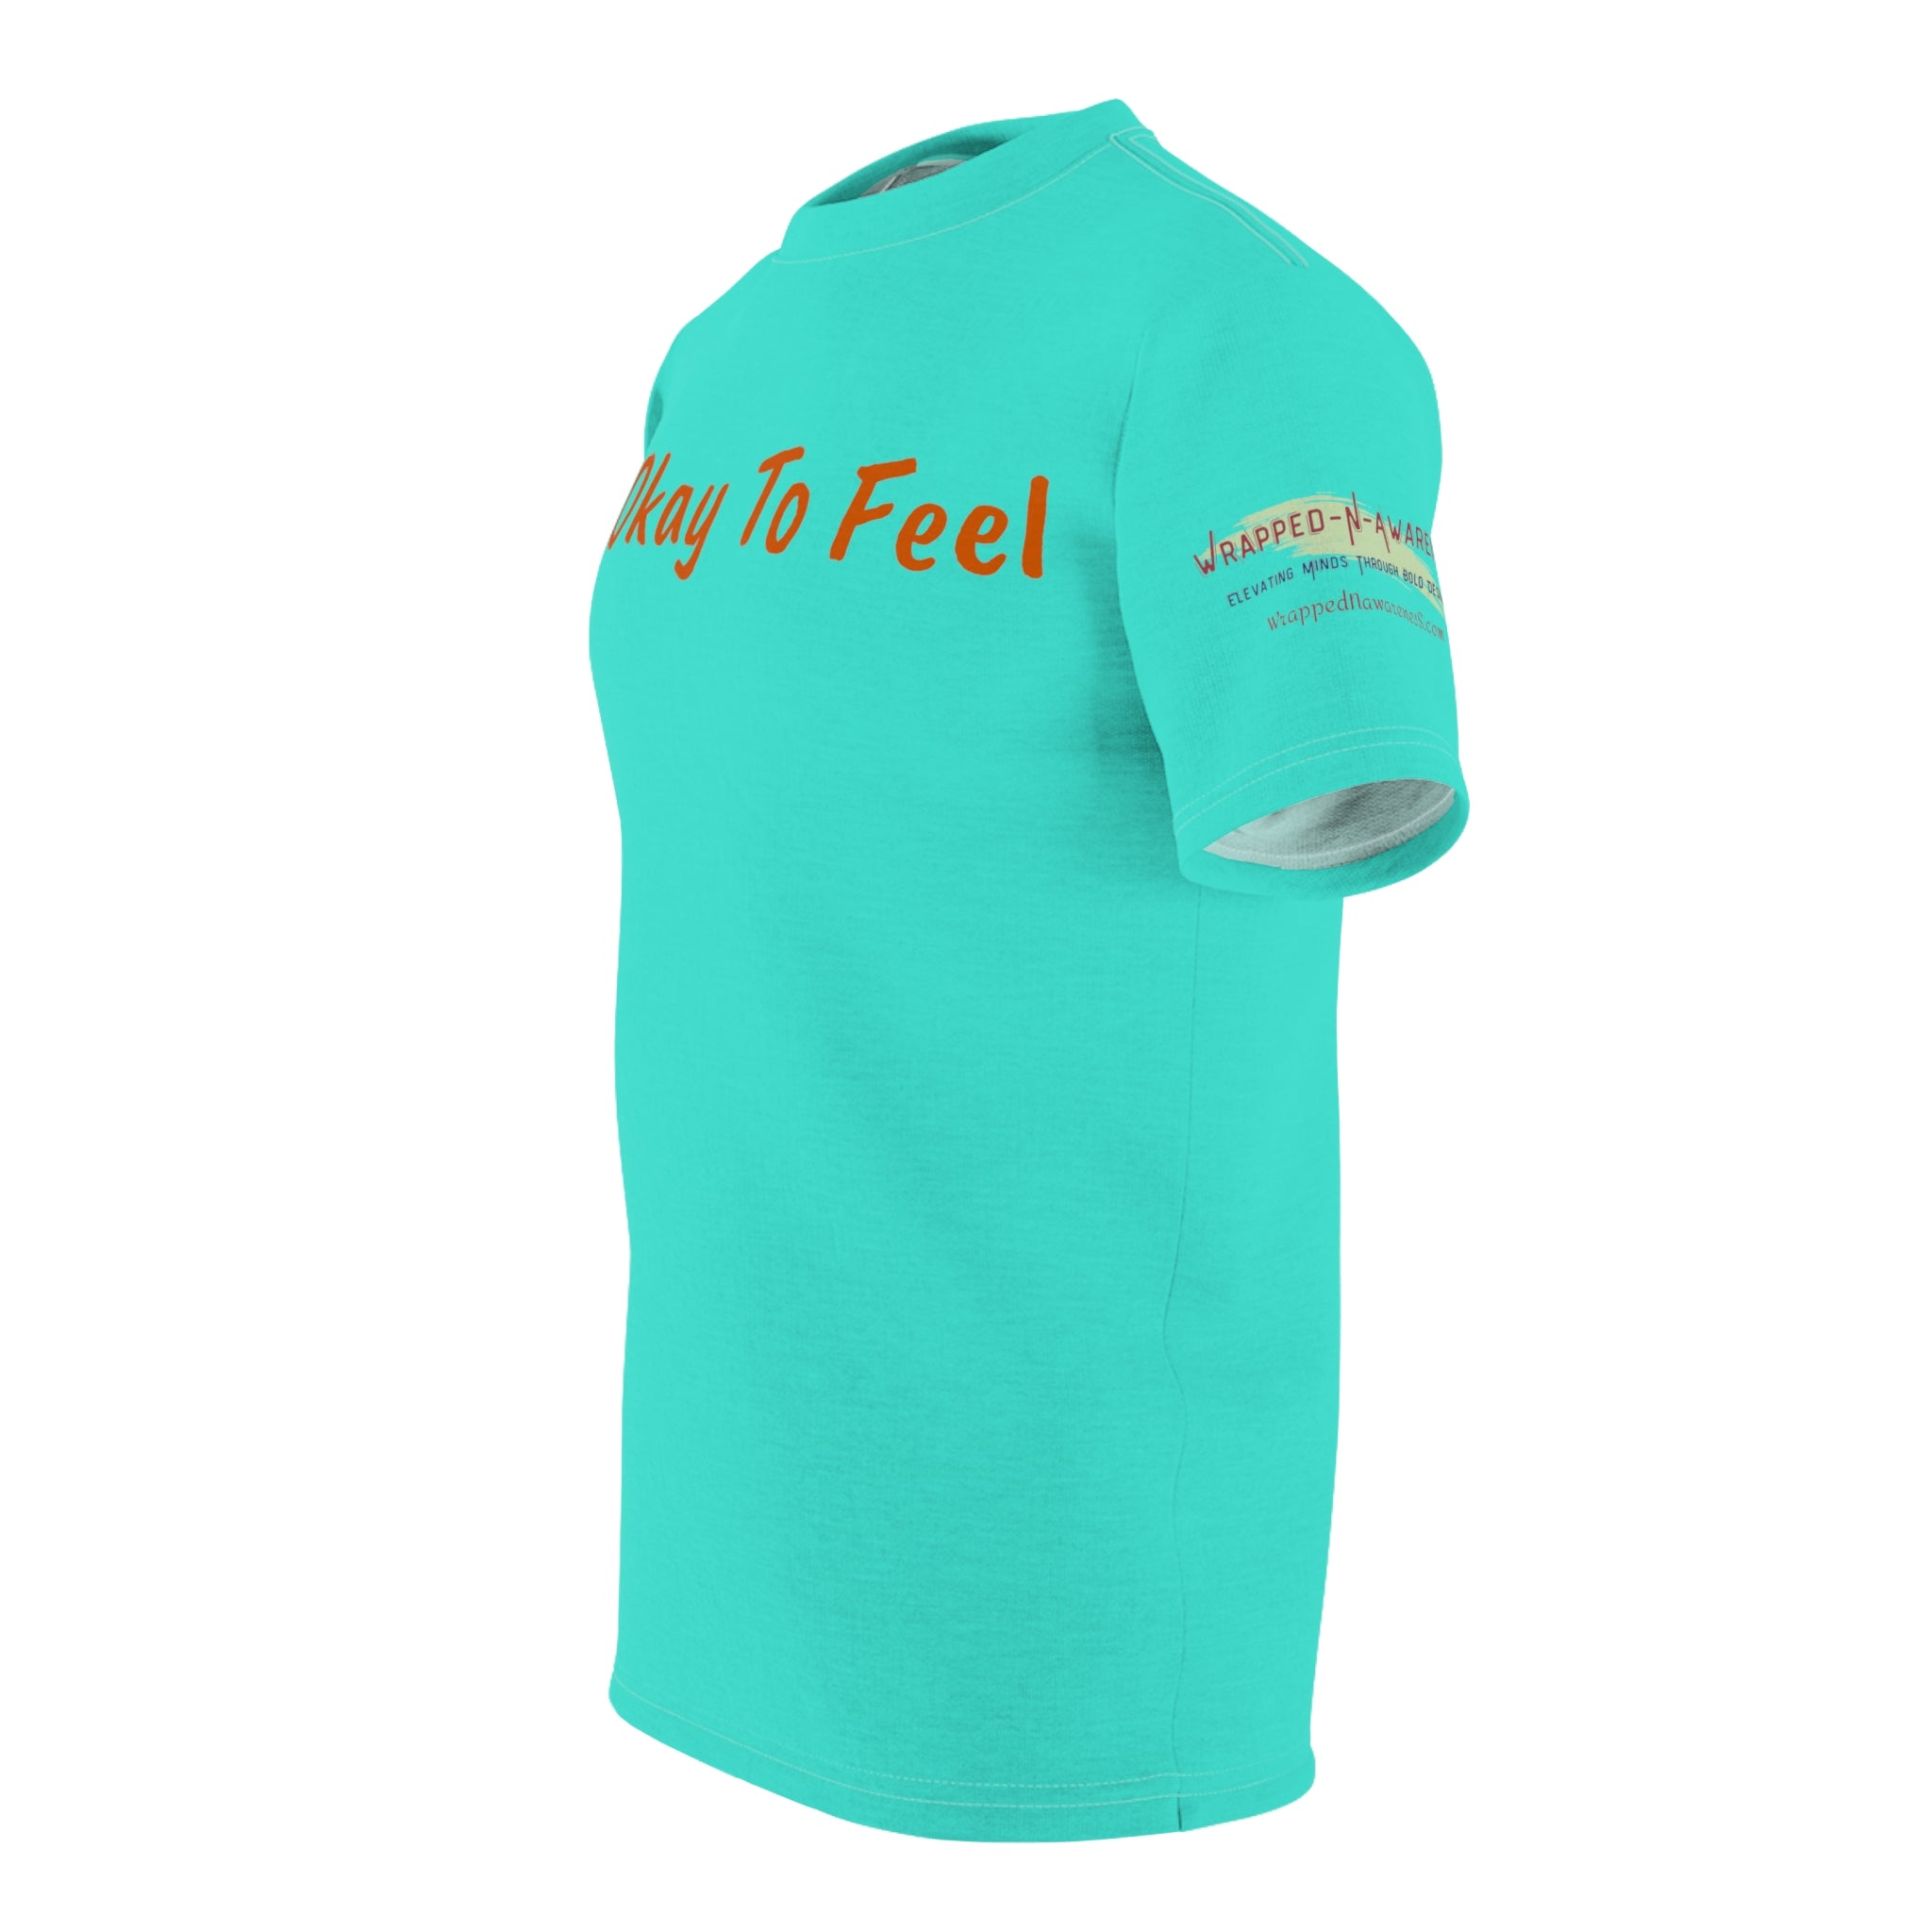 It's Okay to Feel - Unisex Cut & Sew Tee White stitching 4 oz. Athleisure Wear Comfort Cut & Sew Donation Feel Initiative Mental Health Normalization Polyester Tee Unisex All Over Prints 2149926126686088720_2048 Printify